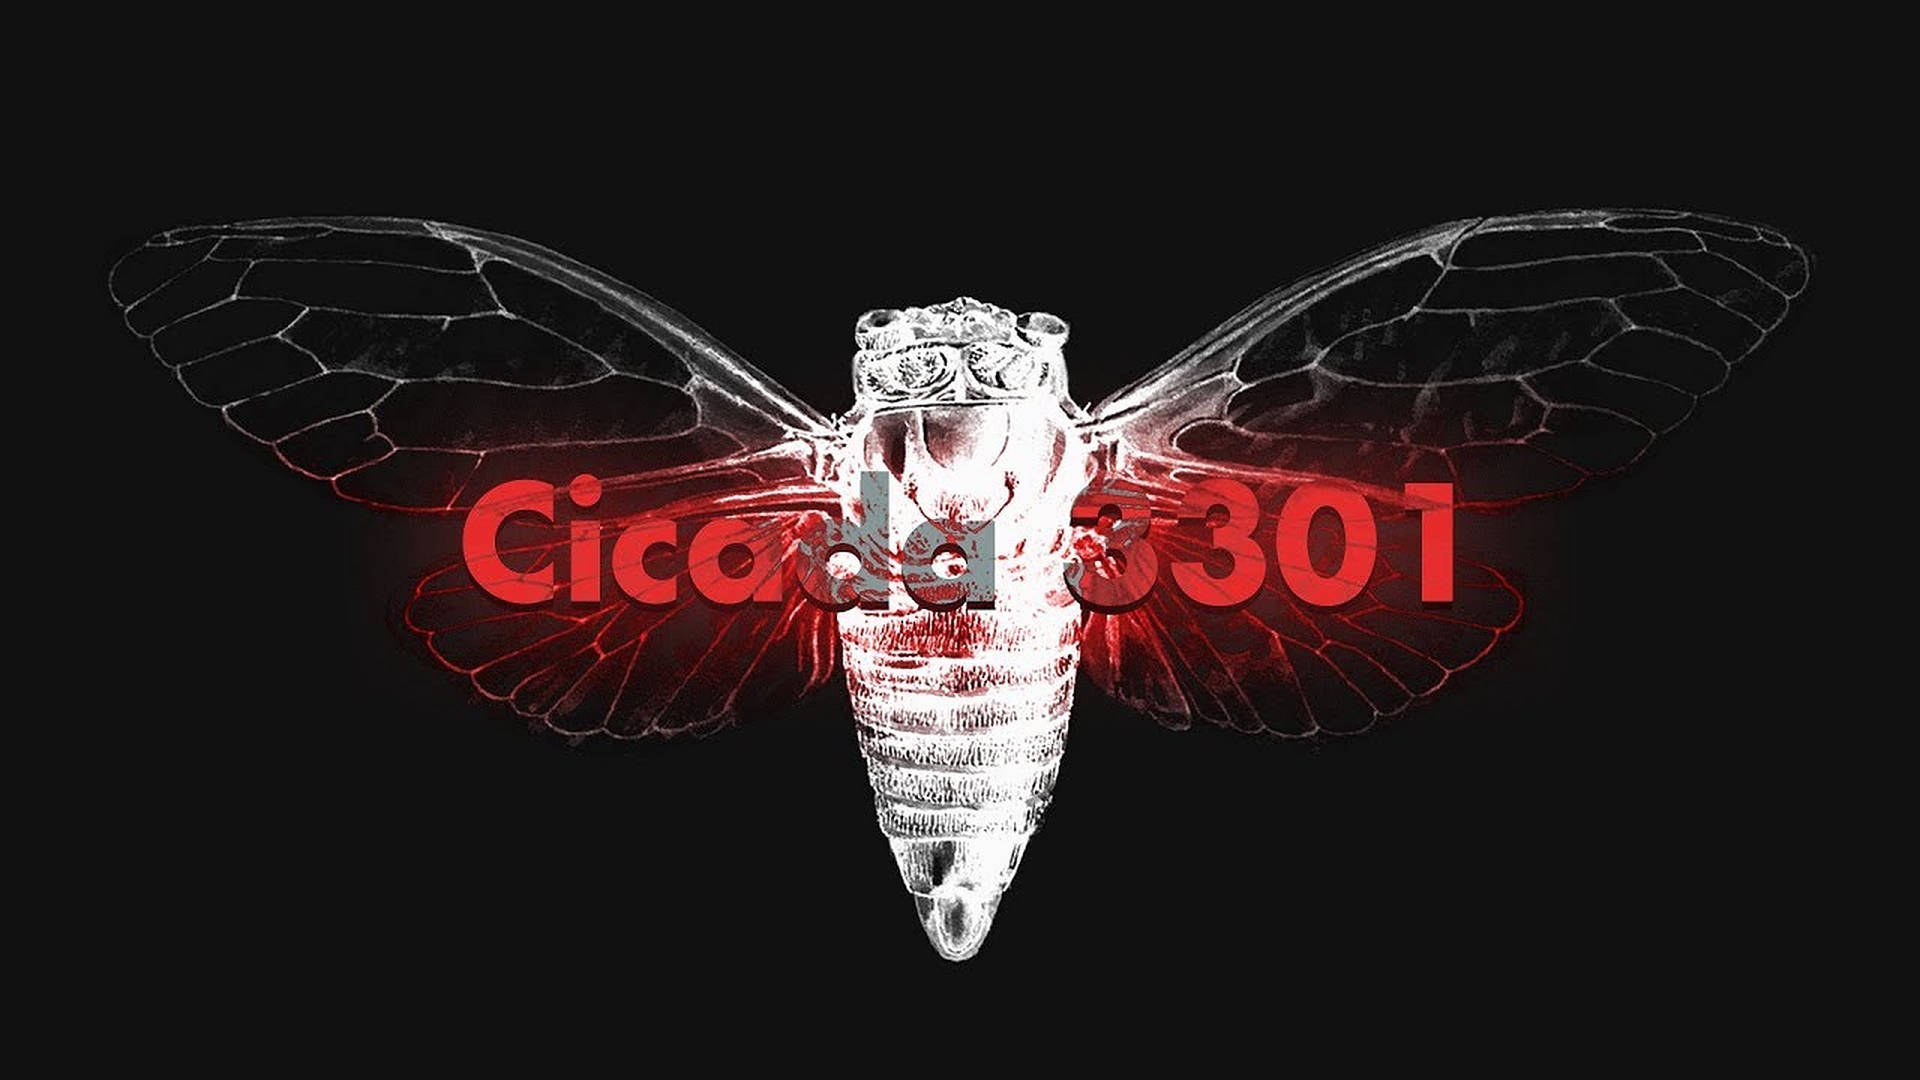 Mysterious Cicada 3301 internet puzzle poster. Wallpaper